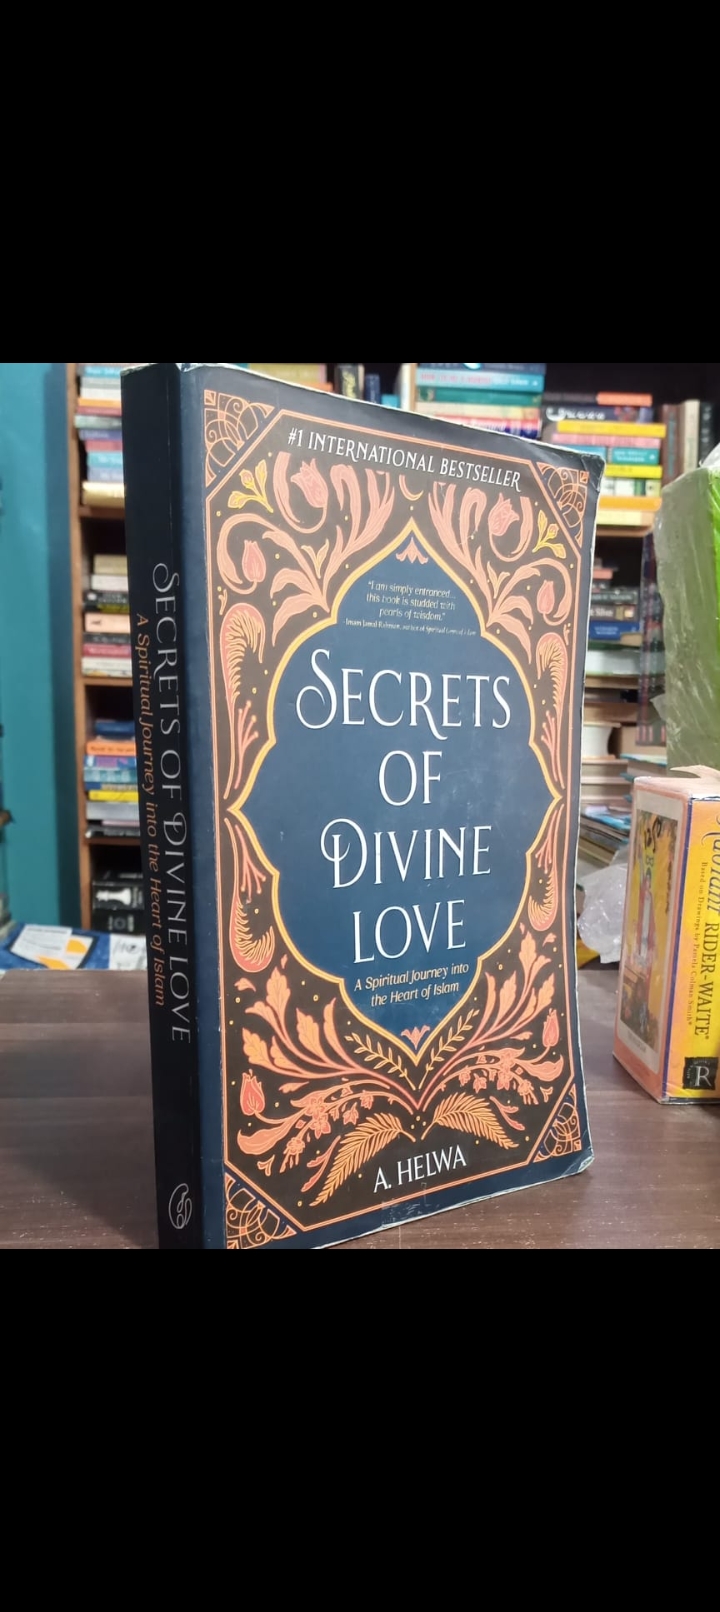 secrets of divine love a spiritual journey into the heart of islam by a.helwa. original paperback